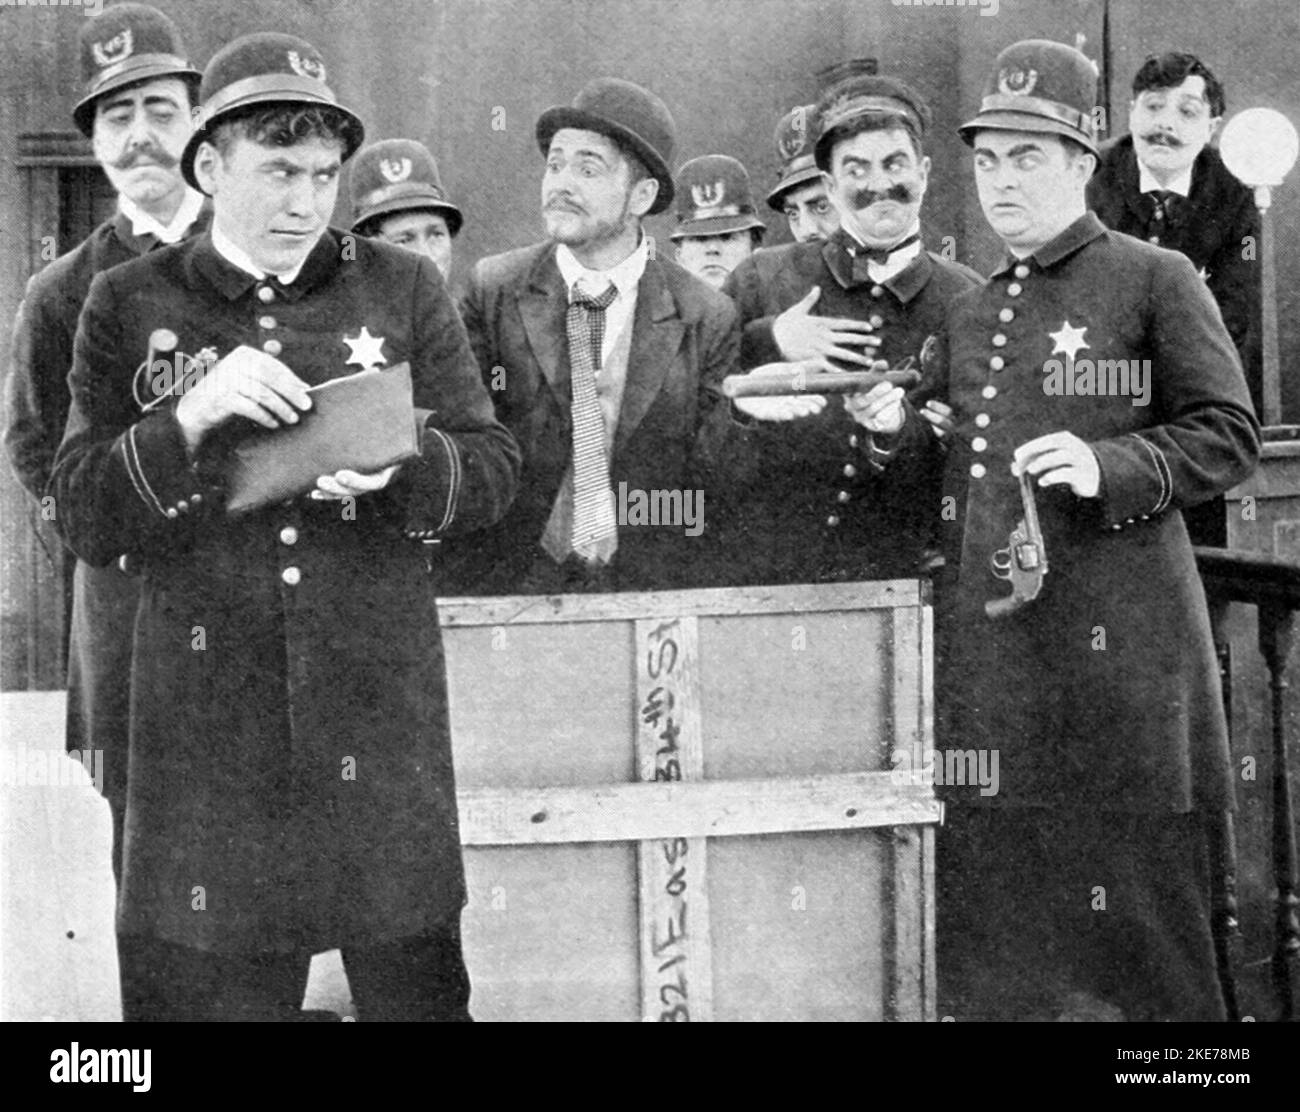 The Keystone Cops in The Stolen Purse (1913). Pictured (left to right): Robert Z. Leonard, Mack Sennett, Bill Haber, Henry Lehrman, ⸻ McAlley, Chester Franklin, Ford Sterling, Fred Mace, and Arthur Tavares. Harry Vallejo Stock Photo